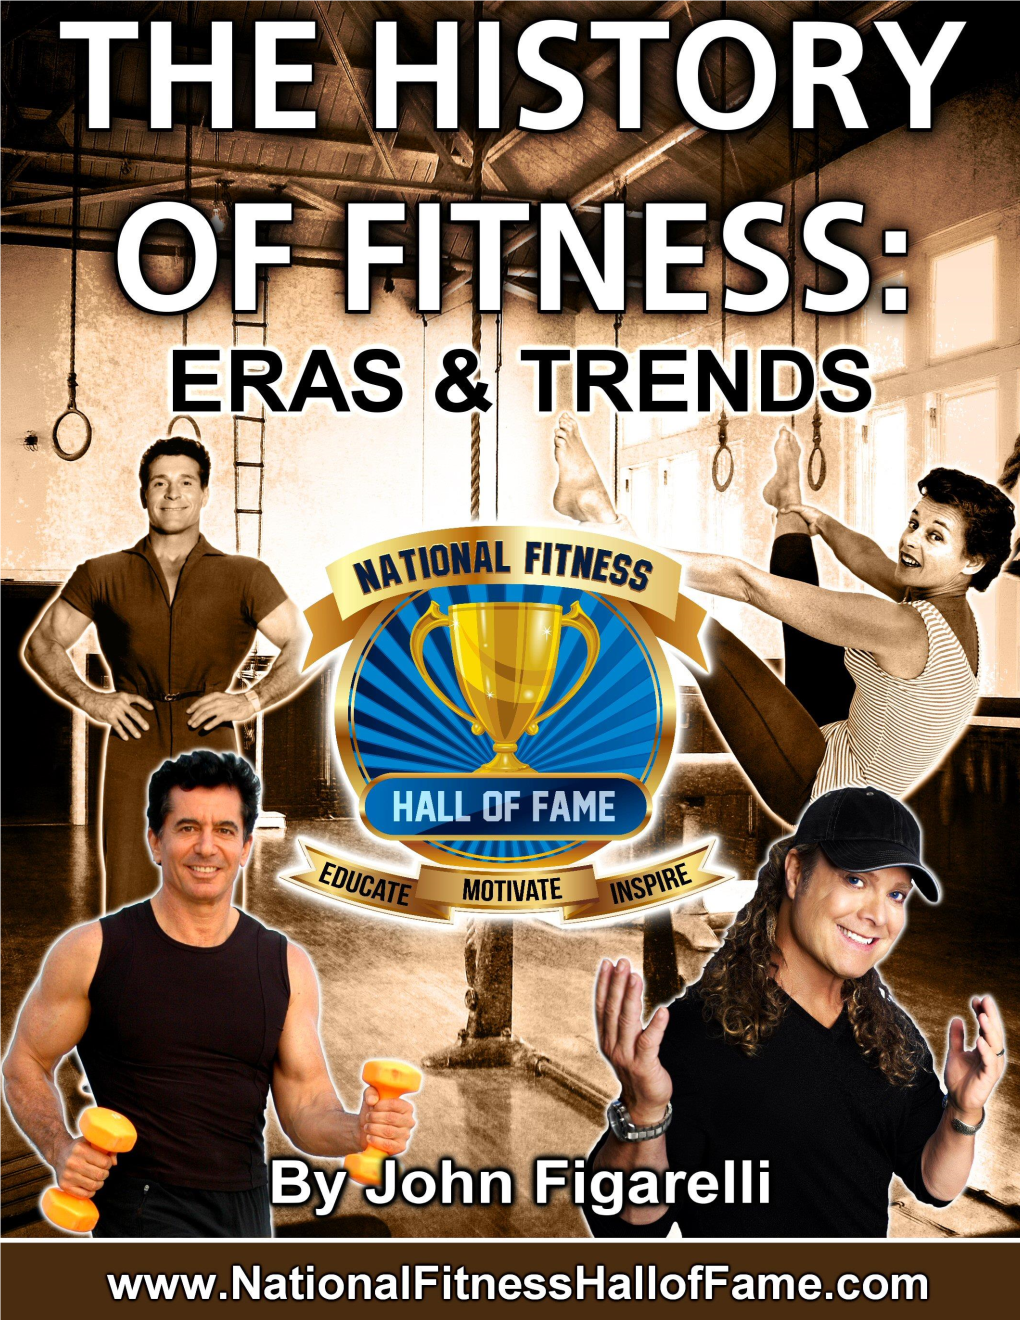 The History of Fitness: Eras, Trends & Icons